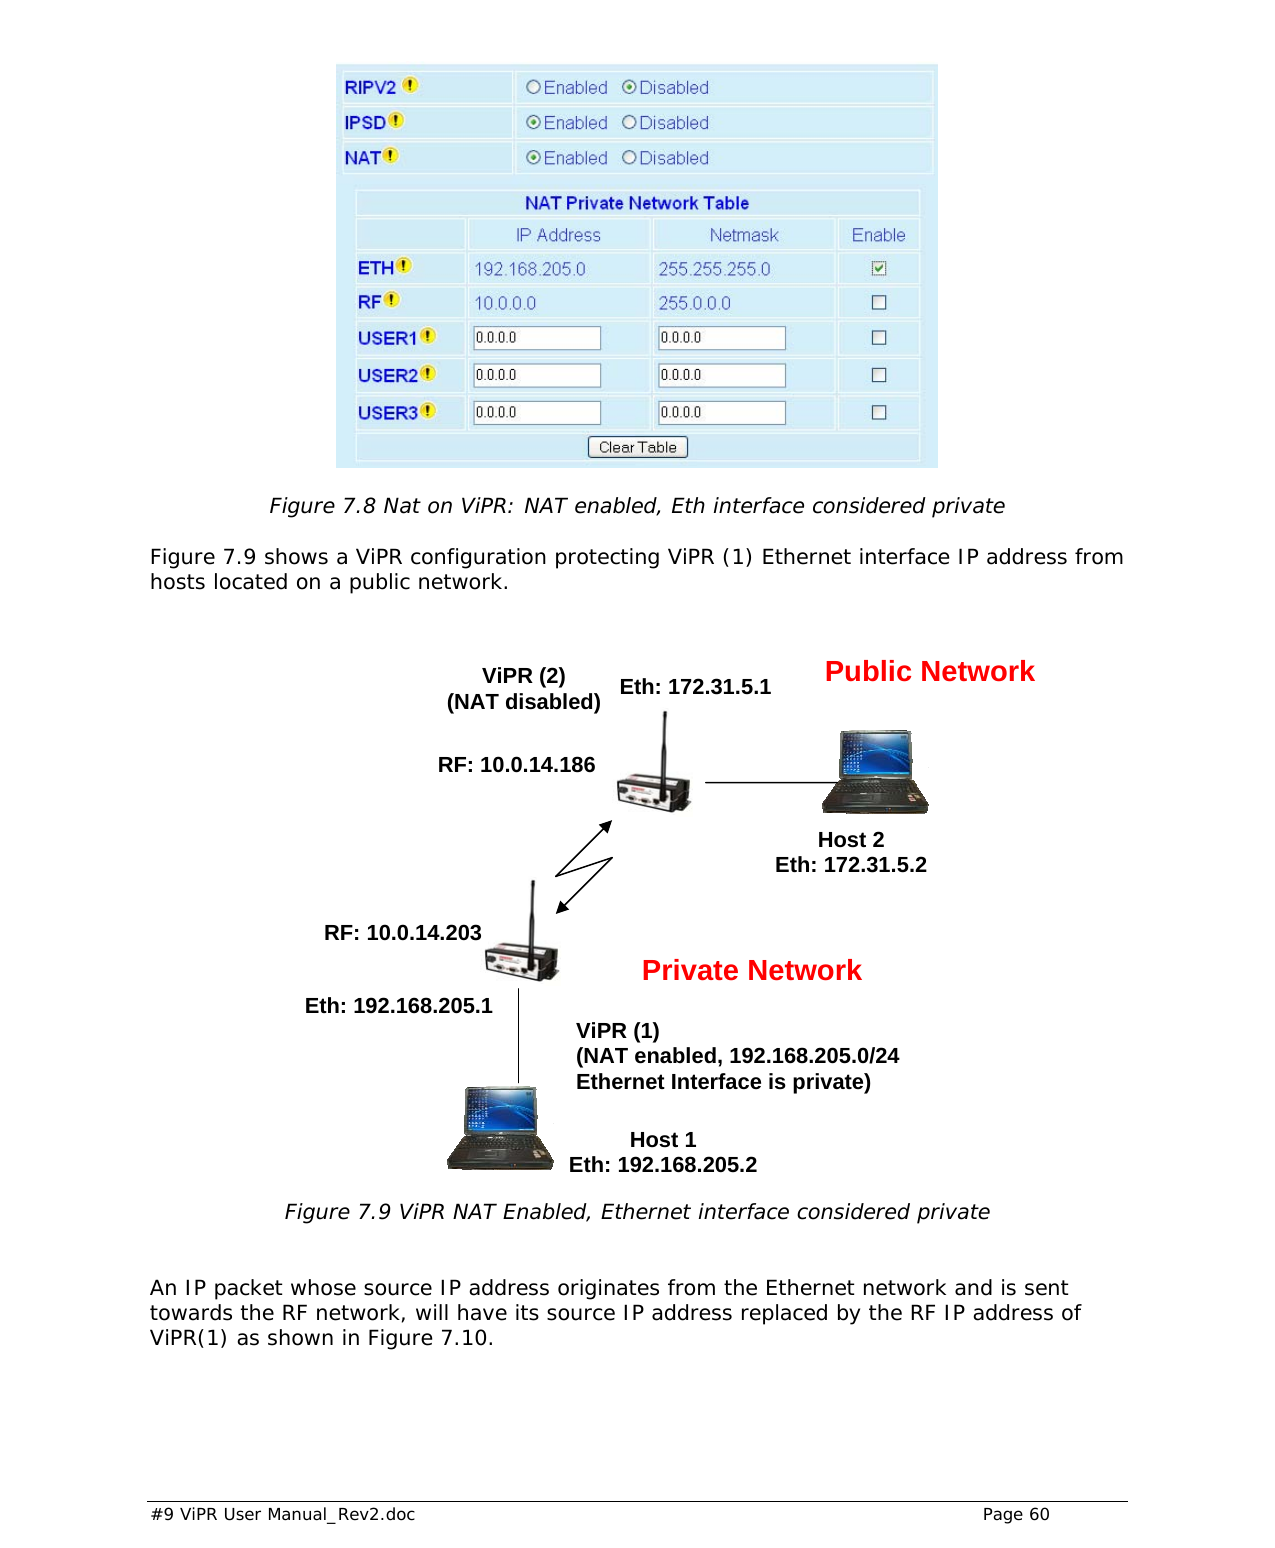  #9 ViPR User Manual_Rev2.doc    Page 60   Figure 7.8 Nat on ViPR: NAT enabled, Eth interface considered private  Figure 7.9 shows a ViPR configuration protecting ViPR (1) Ethernet interface IP address from hosts located on a public network.              Figure 7.9 ViPR NAT Enabled, Ethernet interface considered private   An IP packet whose source IP address originates from the Ethernet network and is sent towards the RF network, will have its source IP address replaced by the RF IP address of ViPR(1) as shown in Figure 7.10.  Eth: 172.31.5.1 ViPR (2) (NAT disabled)  Public NetworkRF: 10.0.14.203 RF: 10.0.14.186Eth: 192.168.205.1 Host 2 Eth: 172.31.5.2 ViPR (1) (NAT enabled, 192.168.205.0/24 Ethernet Interface is private) Private NetworkHost 1 Eth: 192.168.205.2